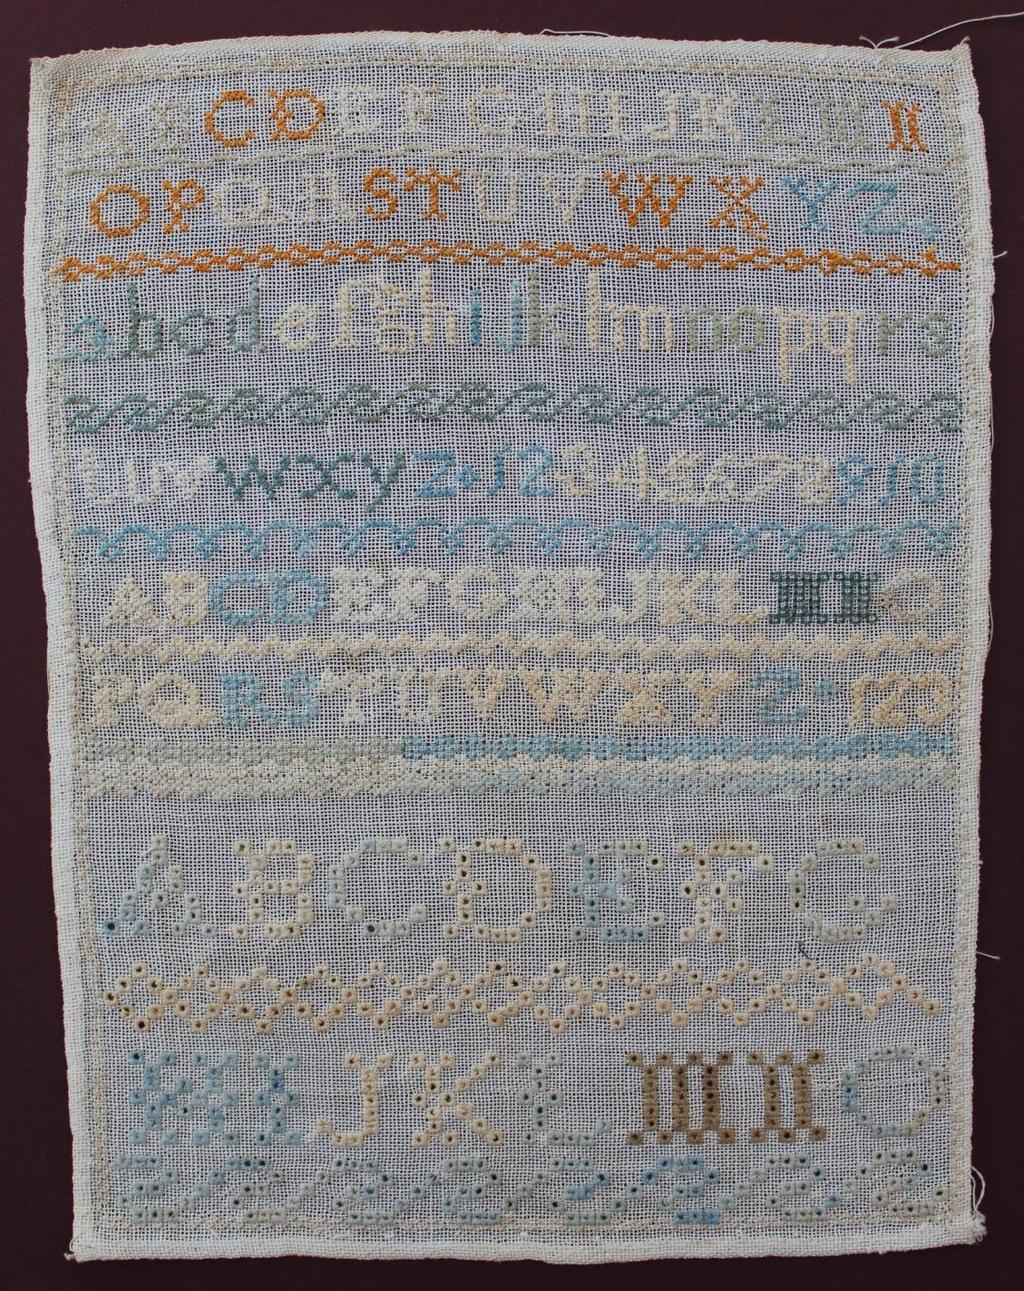 There are a number of different alphabets on the sampler worked